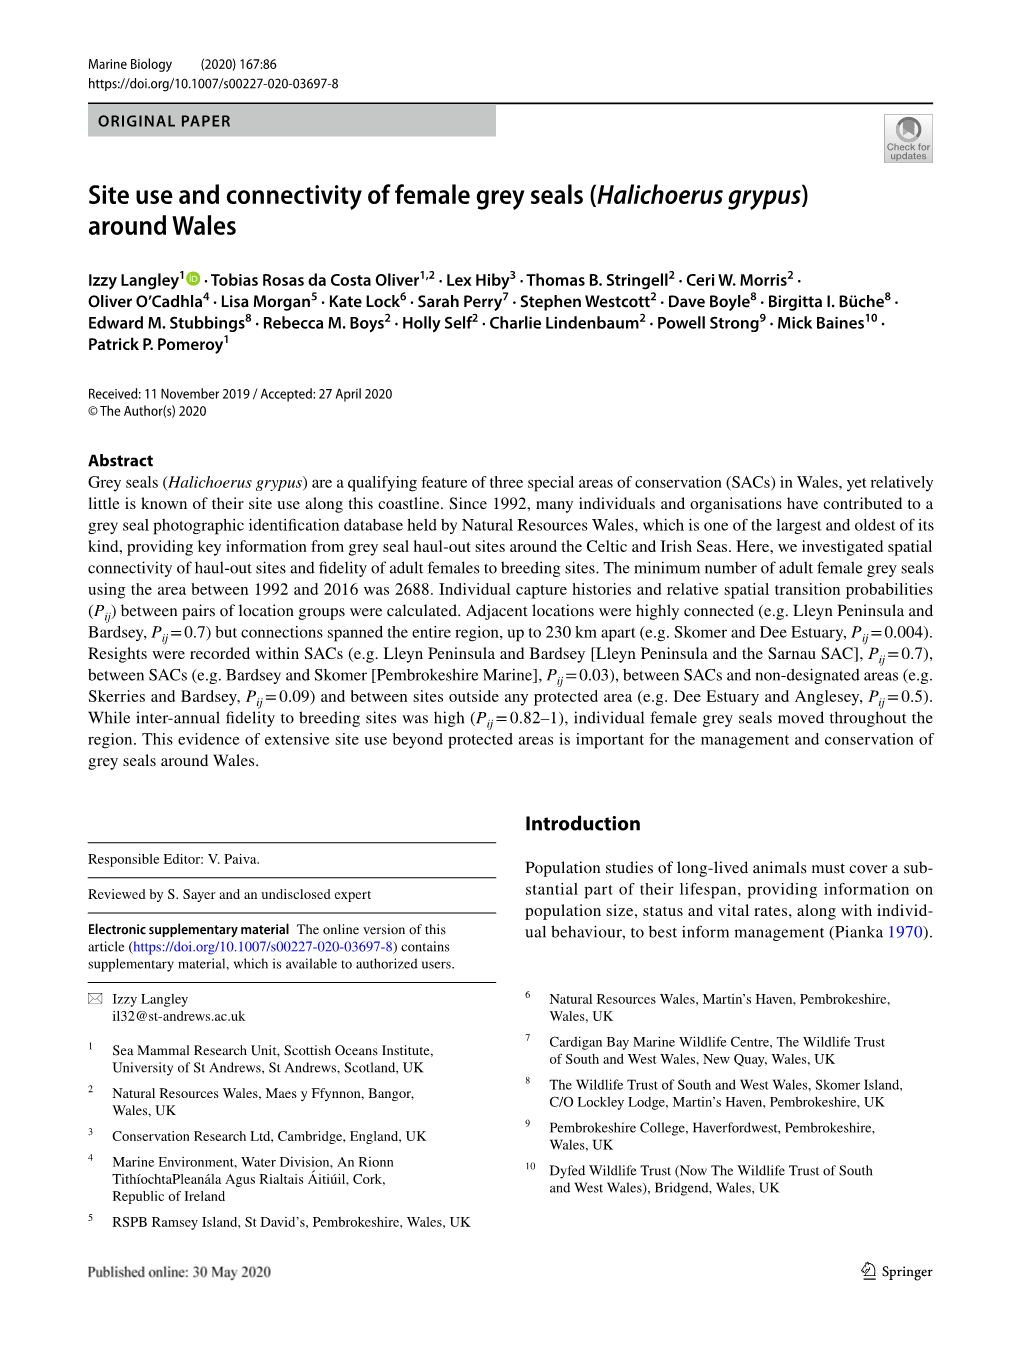 Site Use and Connectivity of Female Grey Seals (Halichoerus Grypus) Around Wales